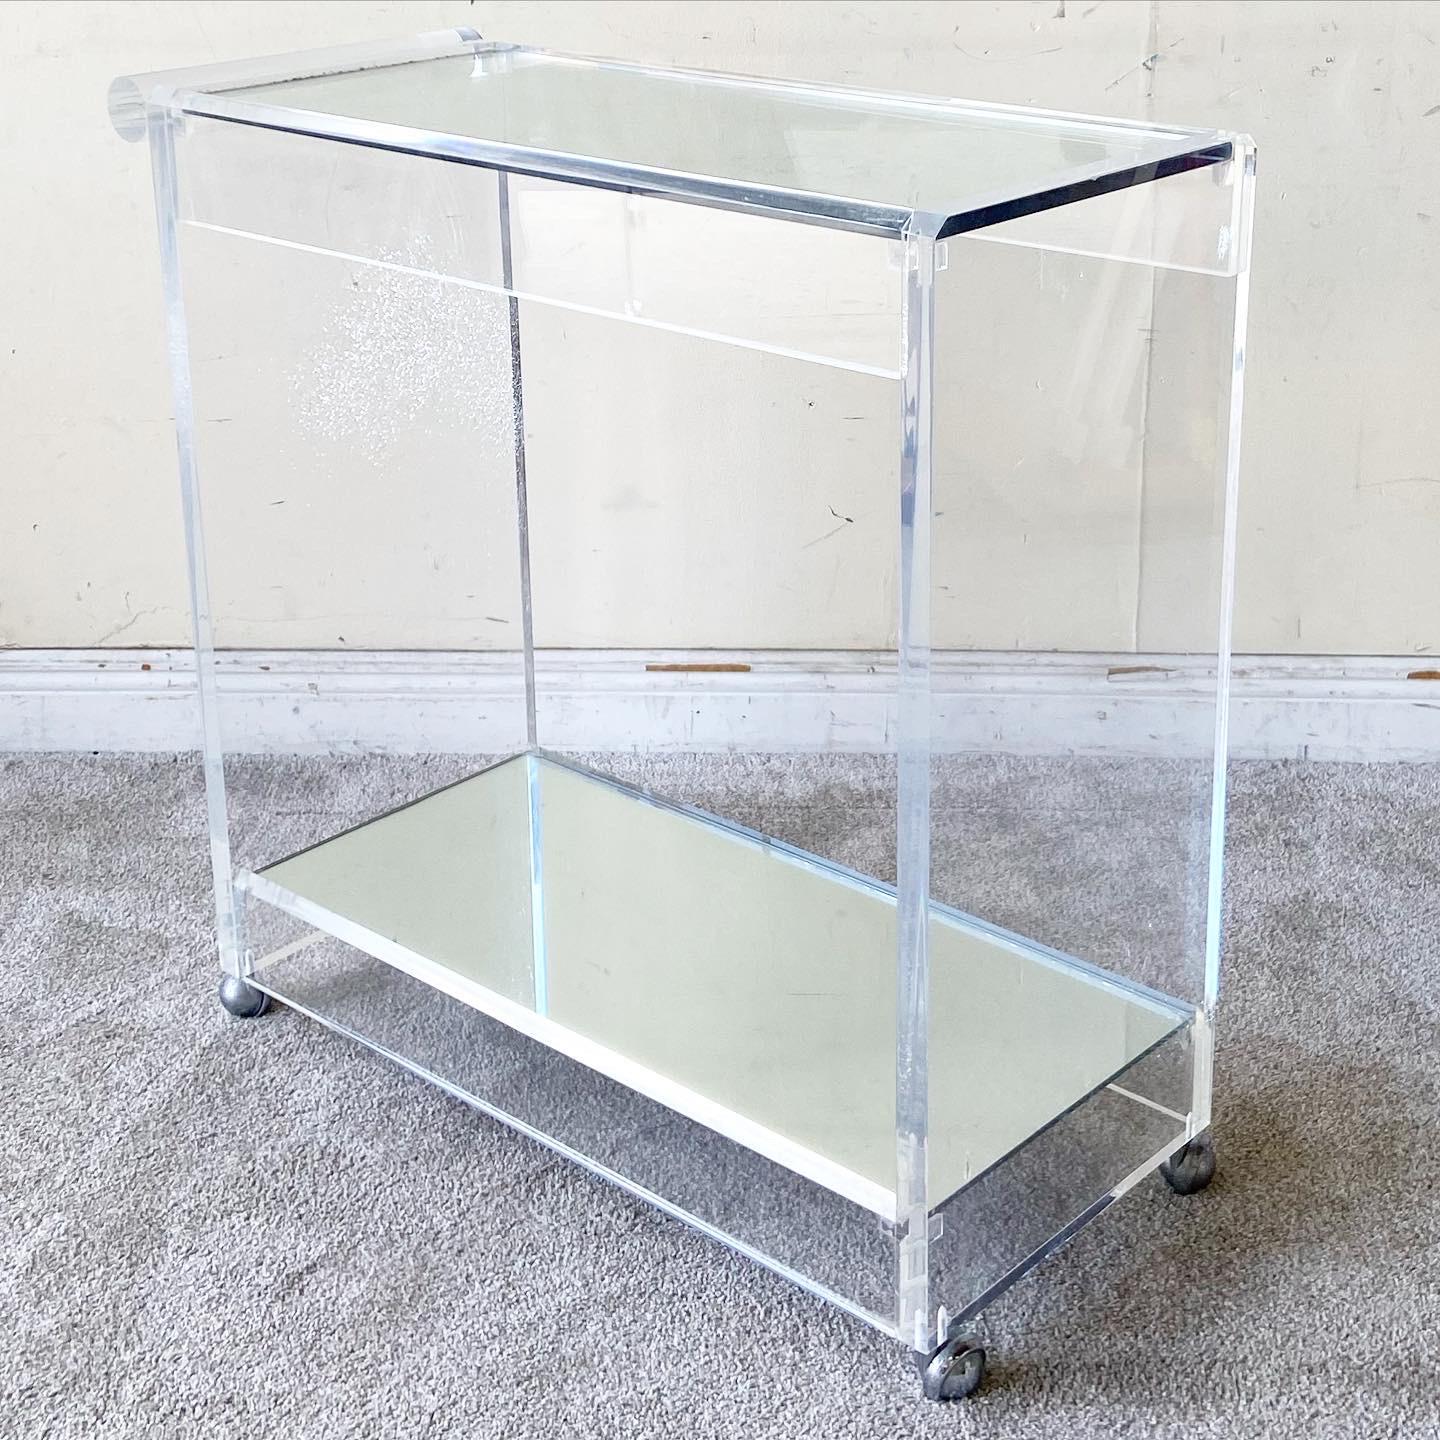 Stunning postmodern lucite bar cart. Features a cylindrical handle with a thick glass top and mirrored bottom shelf.
 